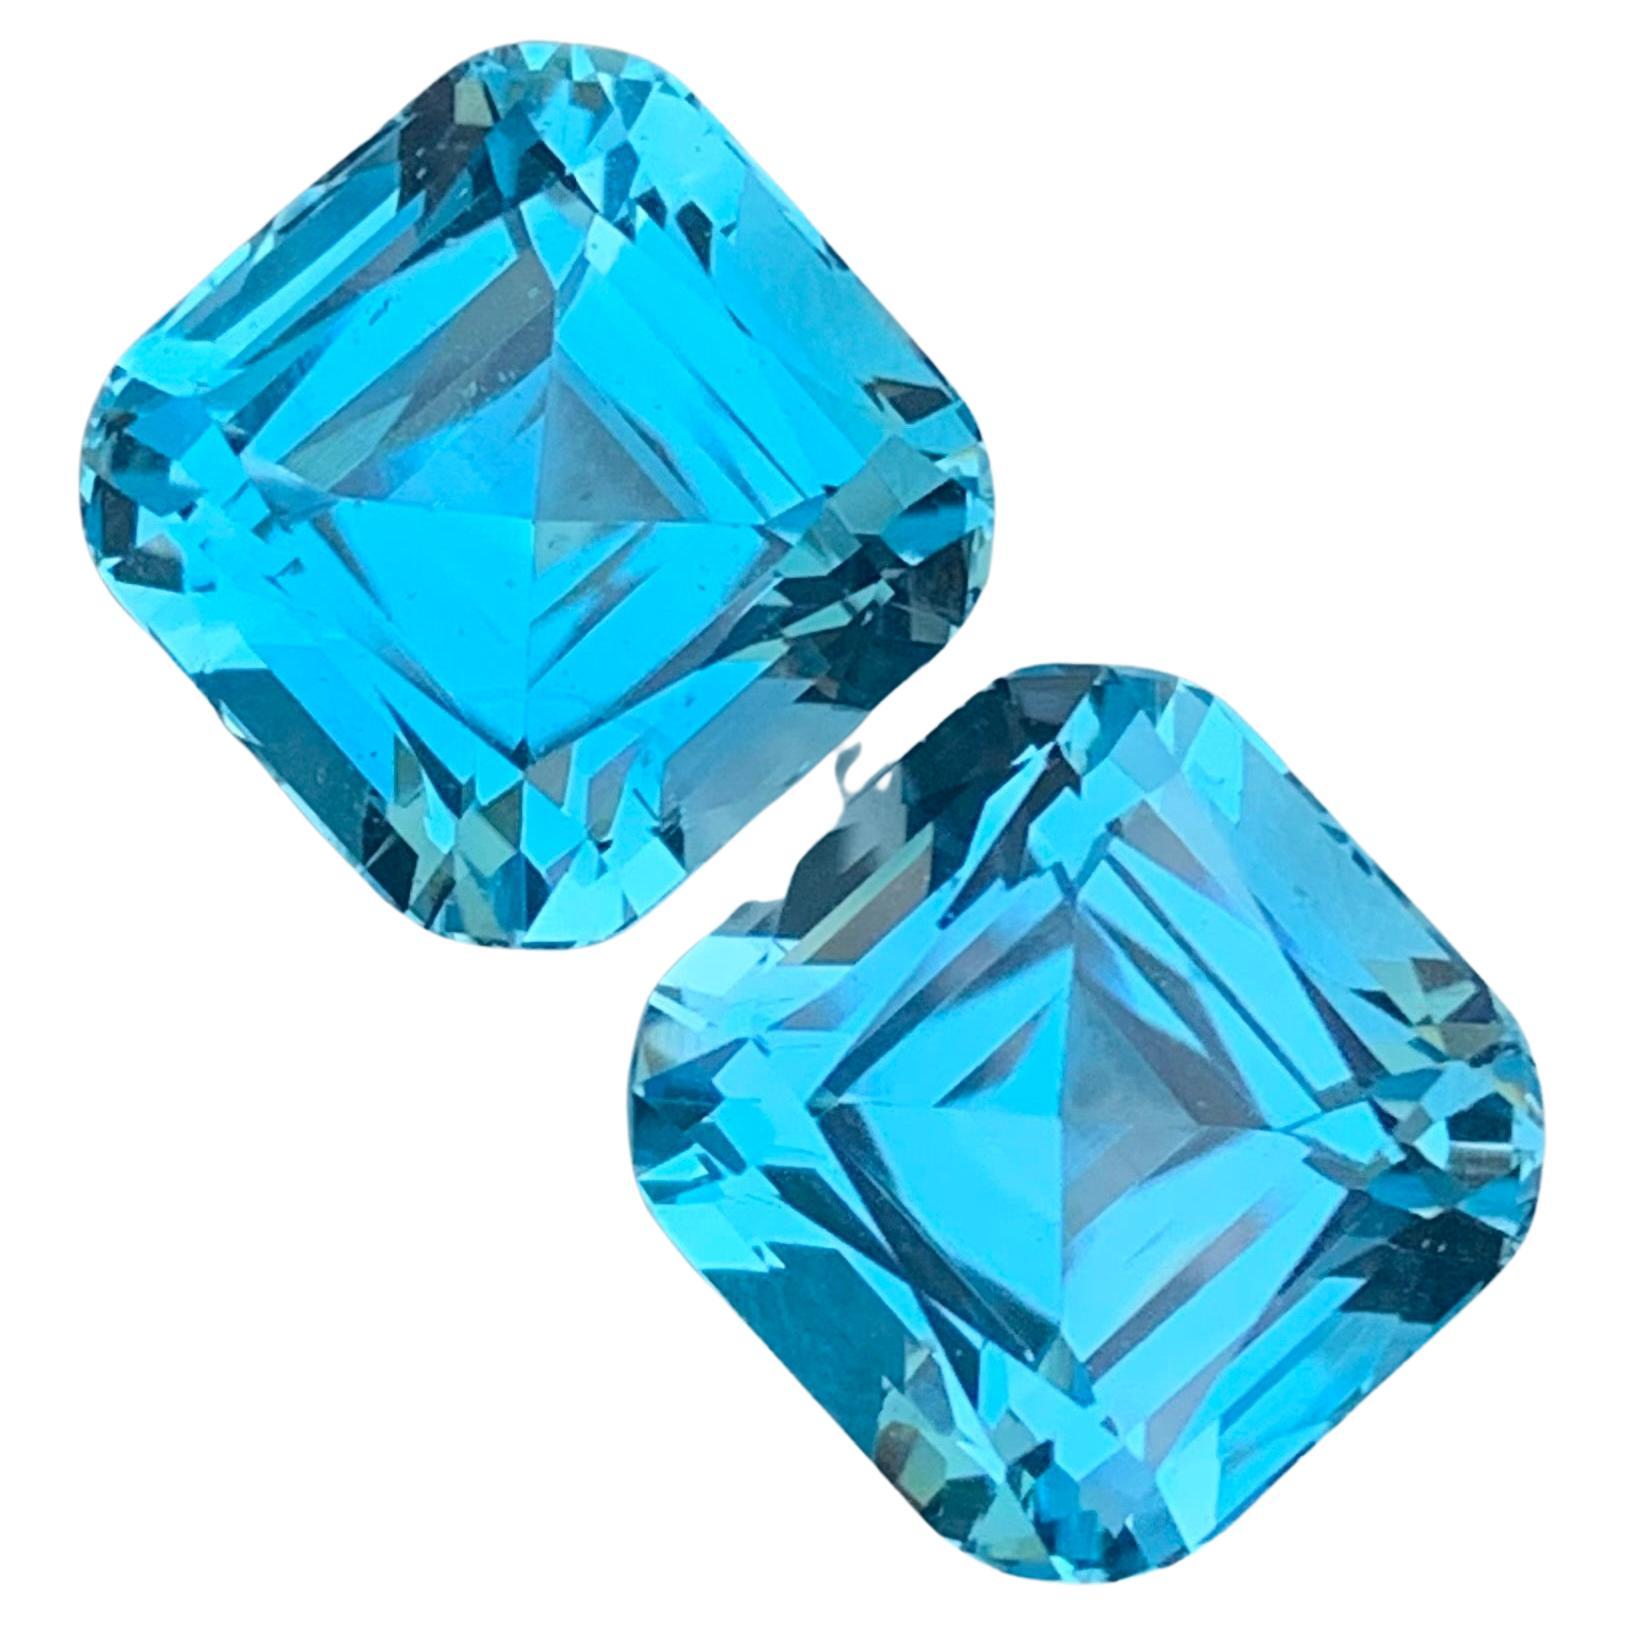 Exceptional Gorgeous Loose Sky Blue Topaz Pairs 25.40 Carat For Earrings Jewelry